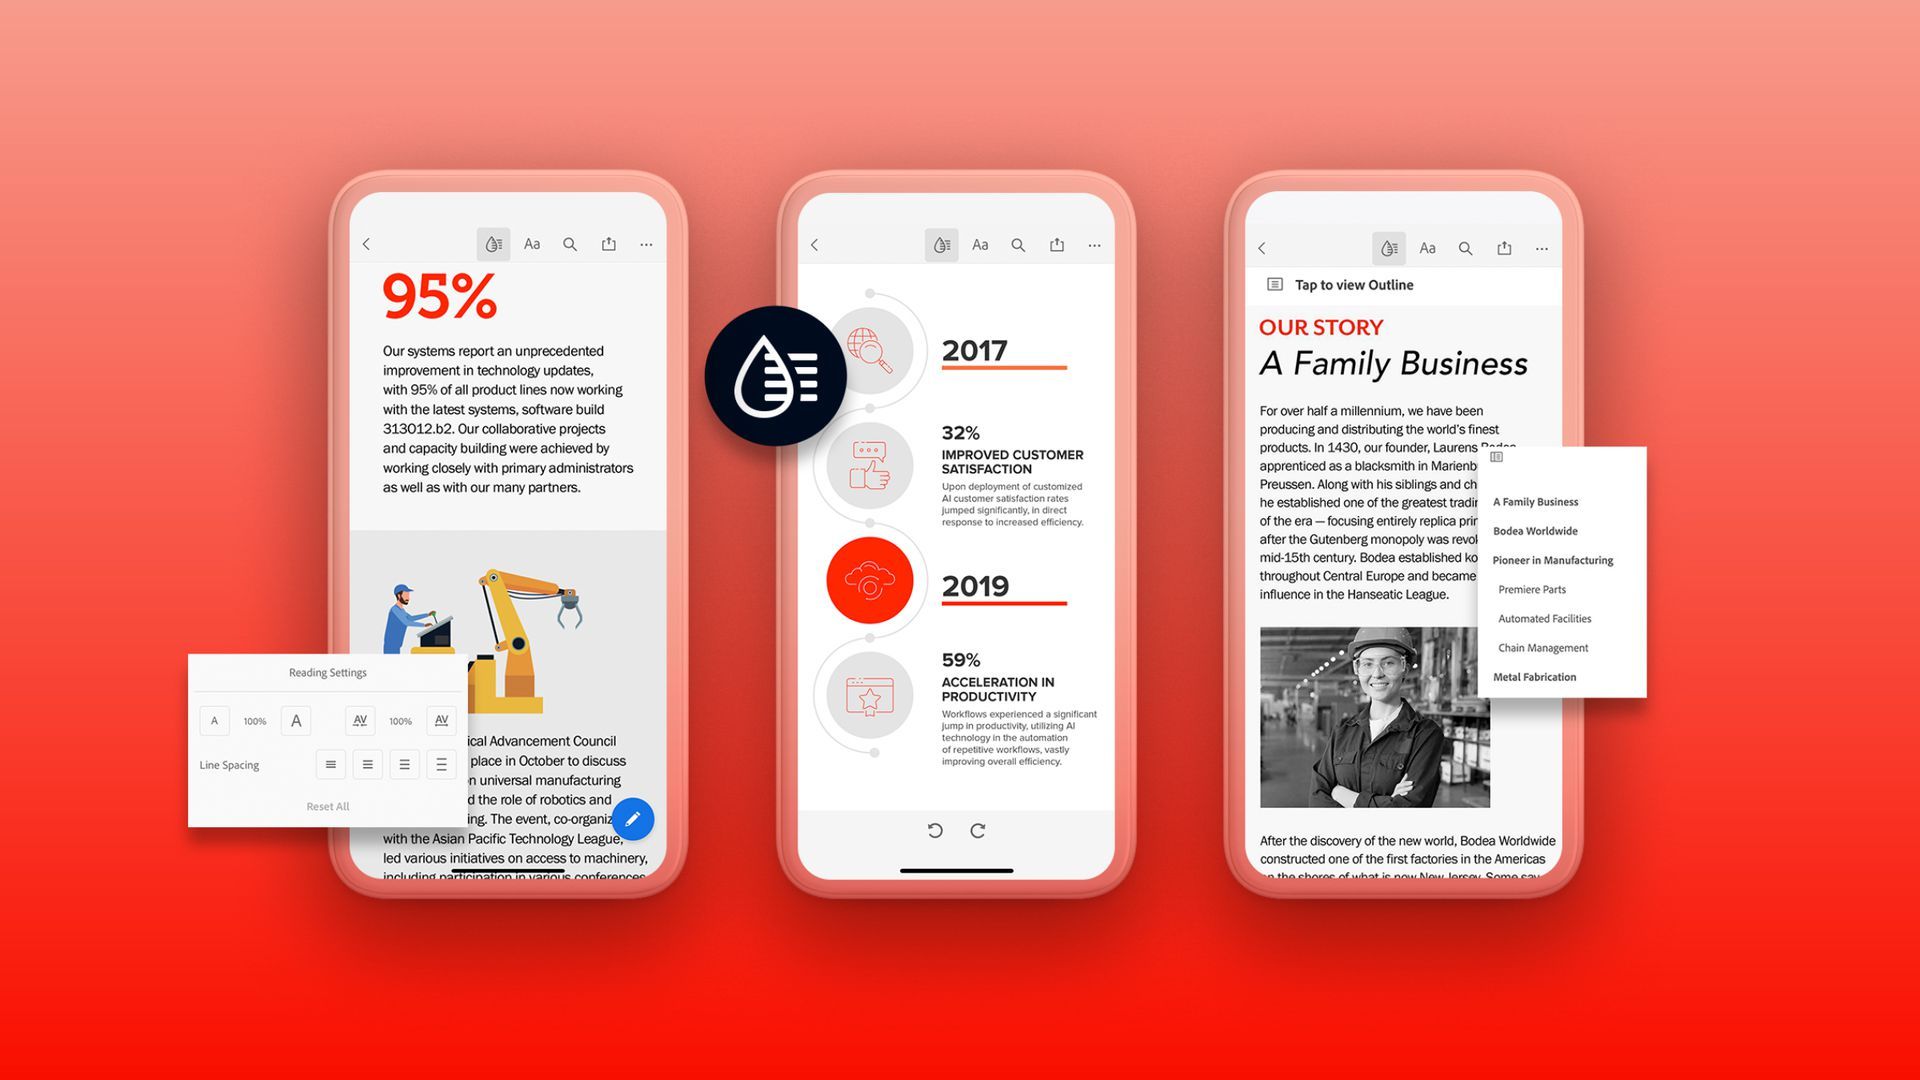 Adobe PDFs on mobile